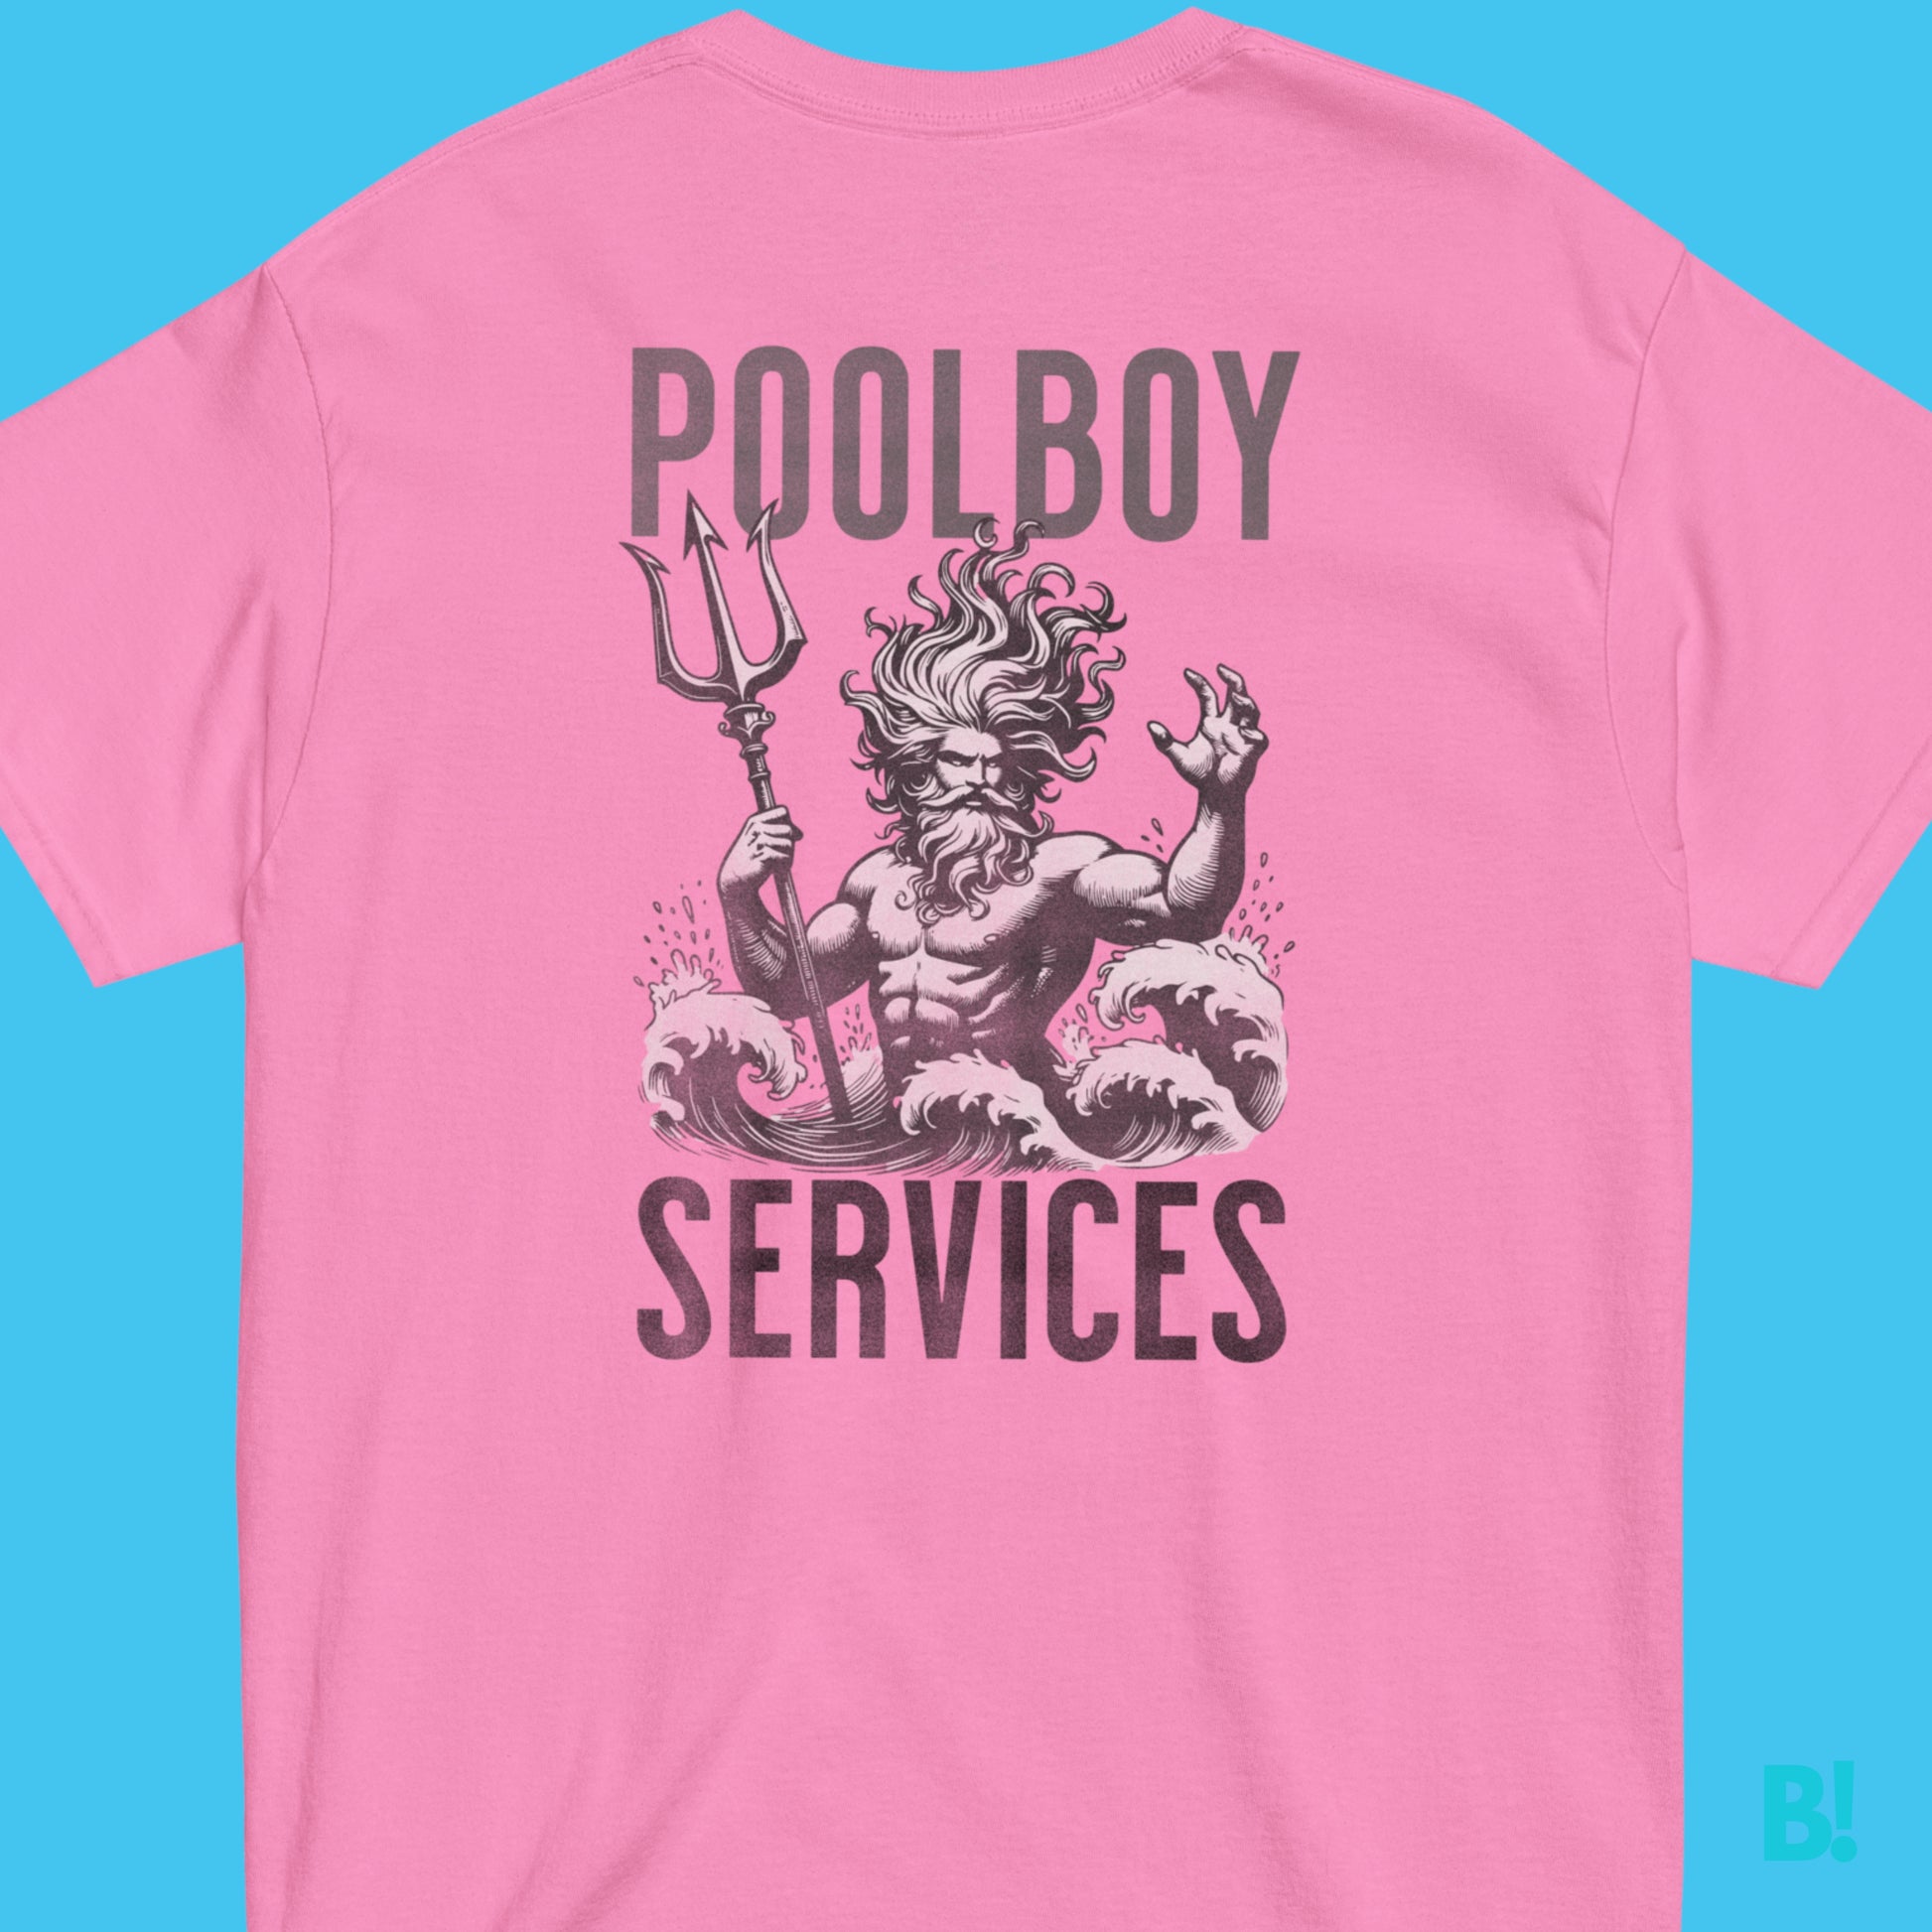 Dive In Style: Pool Boy Service T-Shirts! Splash into cool with our 100% cotton Pool Boy T-Shirts! Available in 5 vibrant colors & all sizes. Perfect poolside attire by B!NKY. €34.50 B!NKY Comfywear